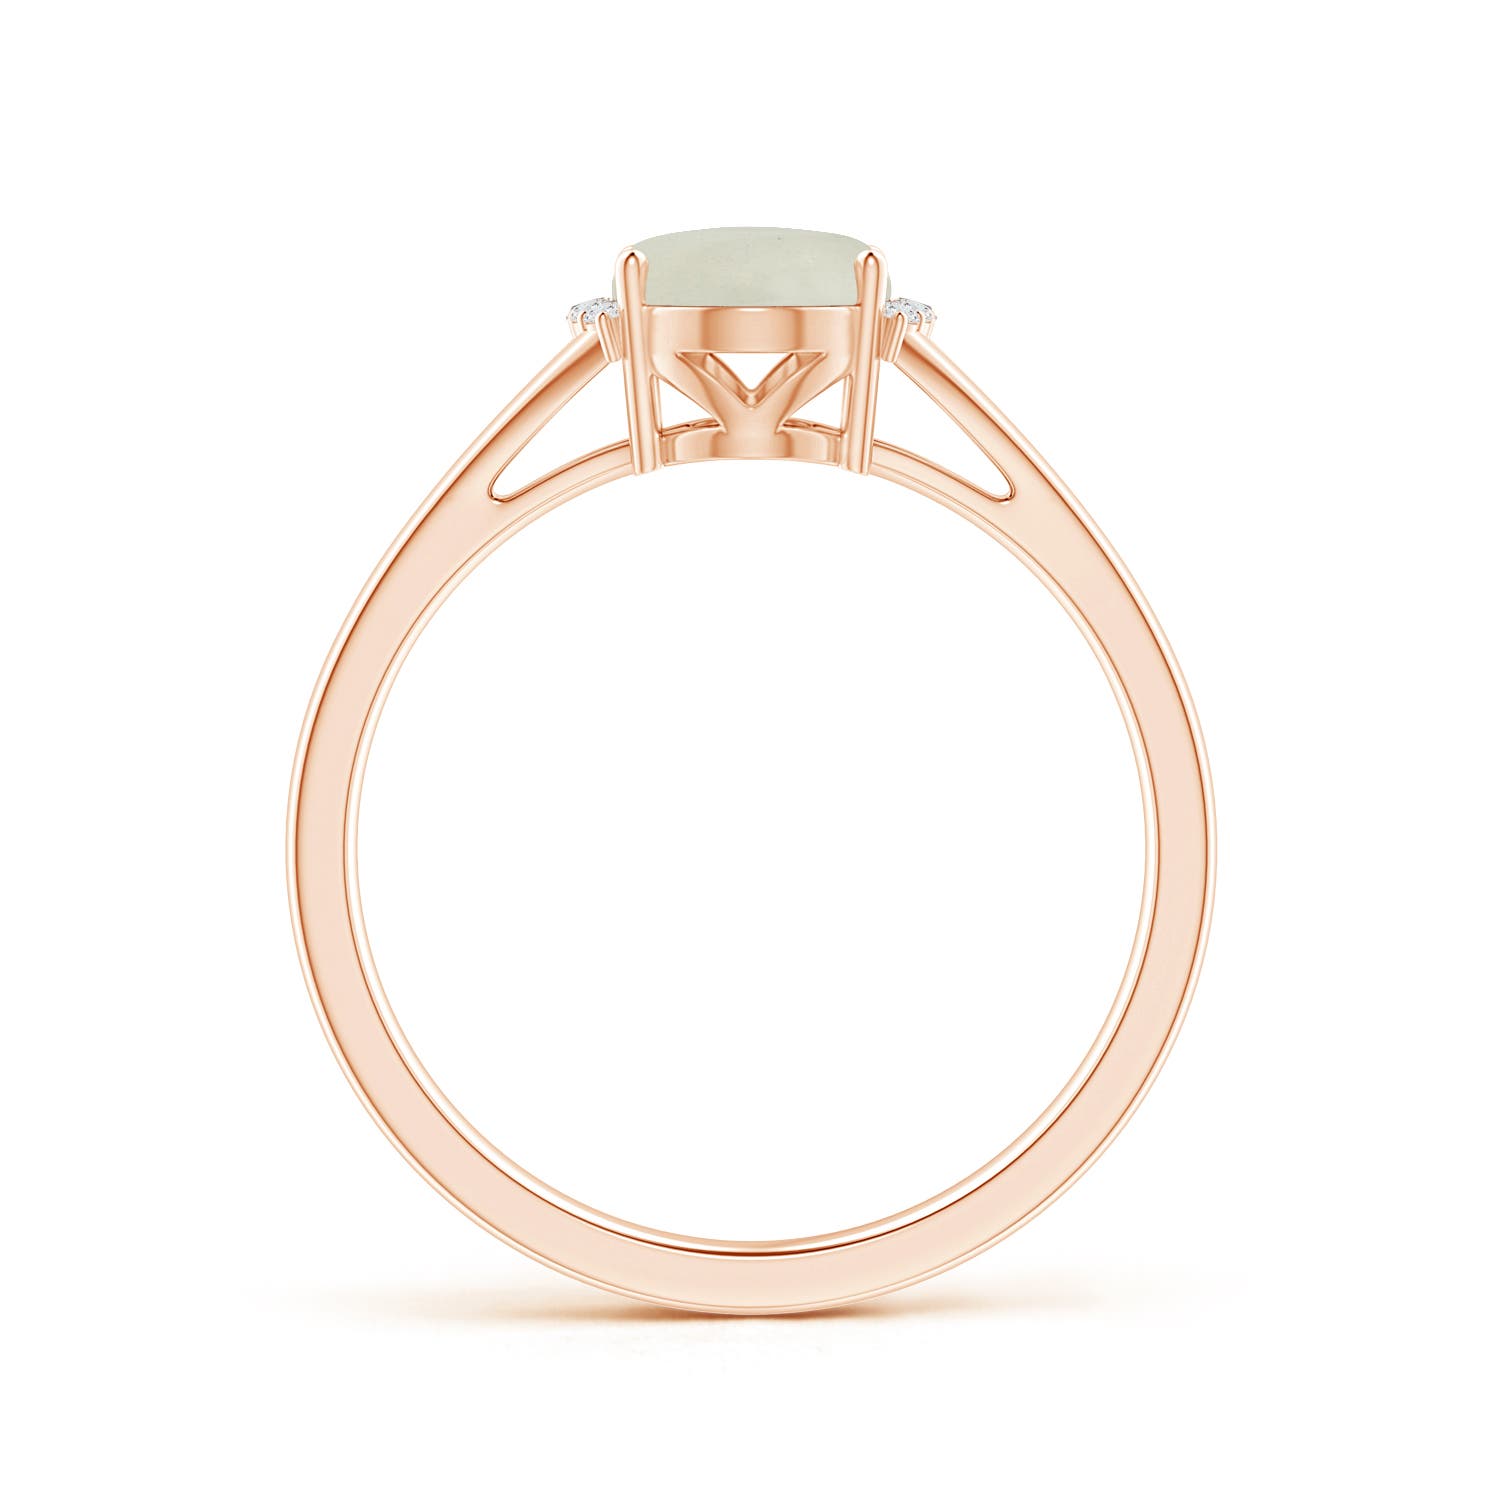 AA - Moonstone / 1.15 CT / 14 KT Rose Gold